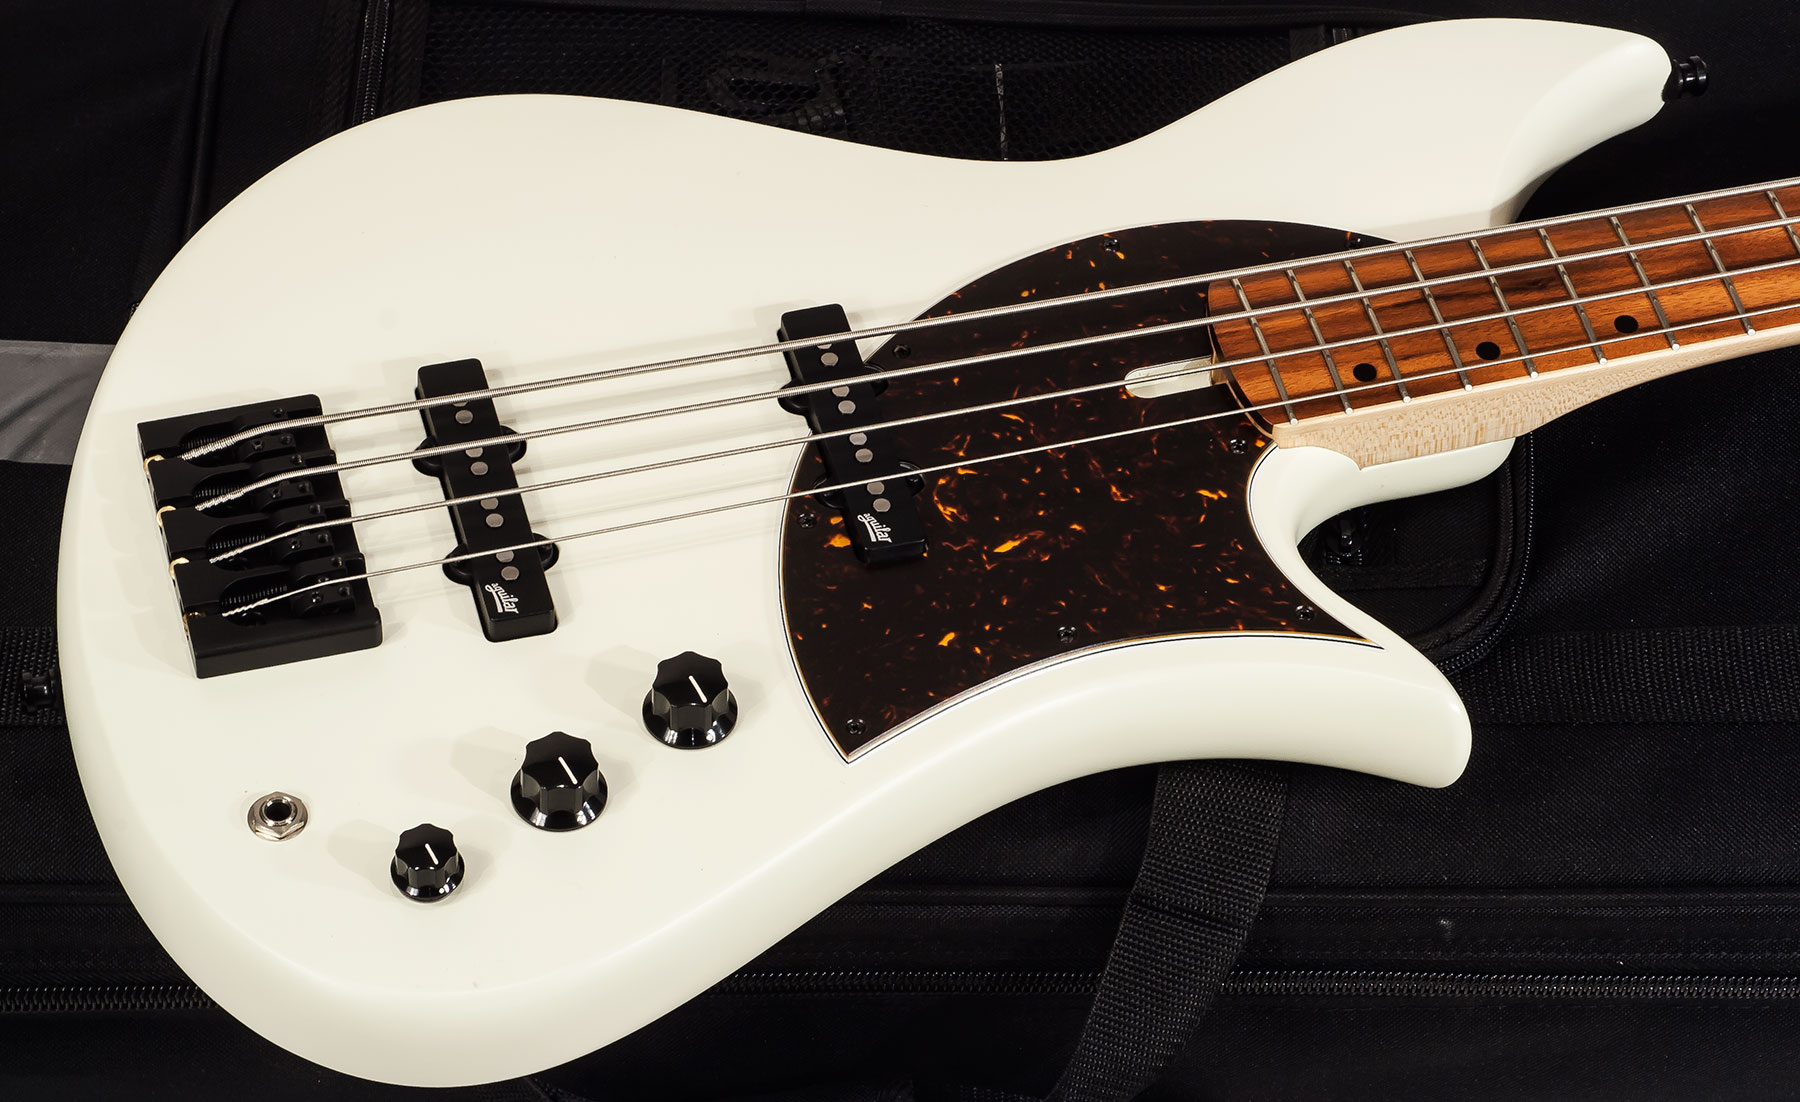 Aquilina Sirius 4 Standard Rw - White - Solid body electric bass - Variation 1